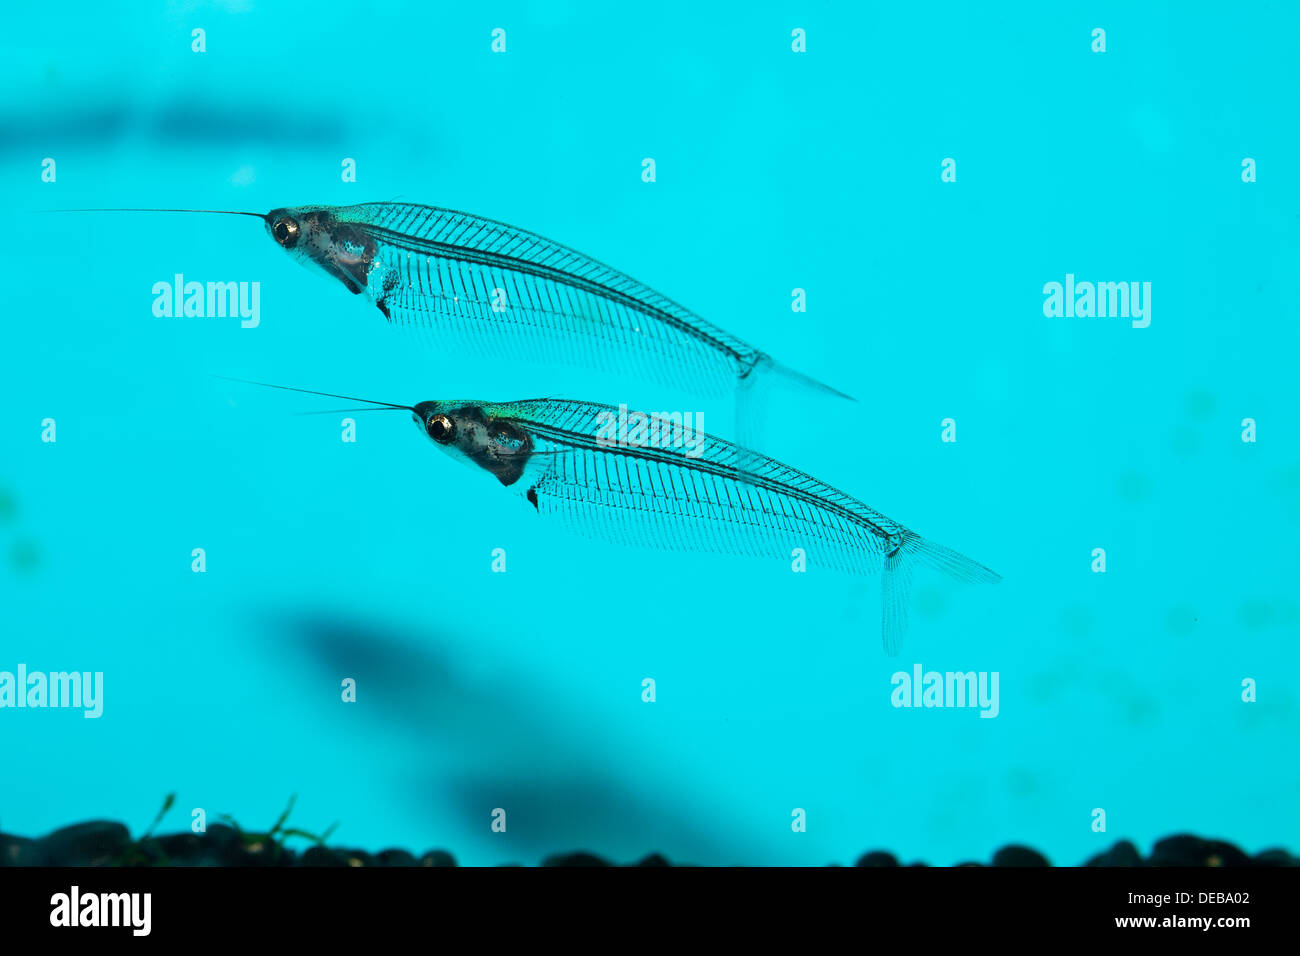 Two glass catfish against a bright blue background in a fish tank. Stock Photo